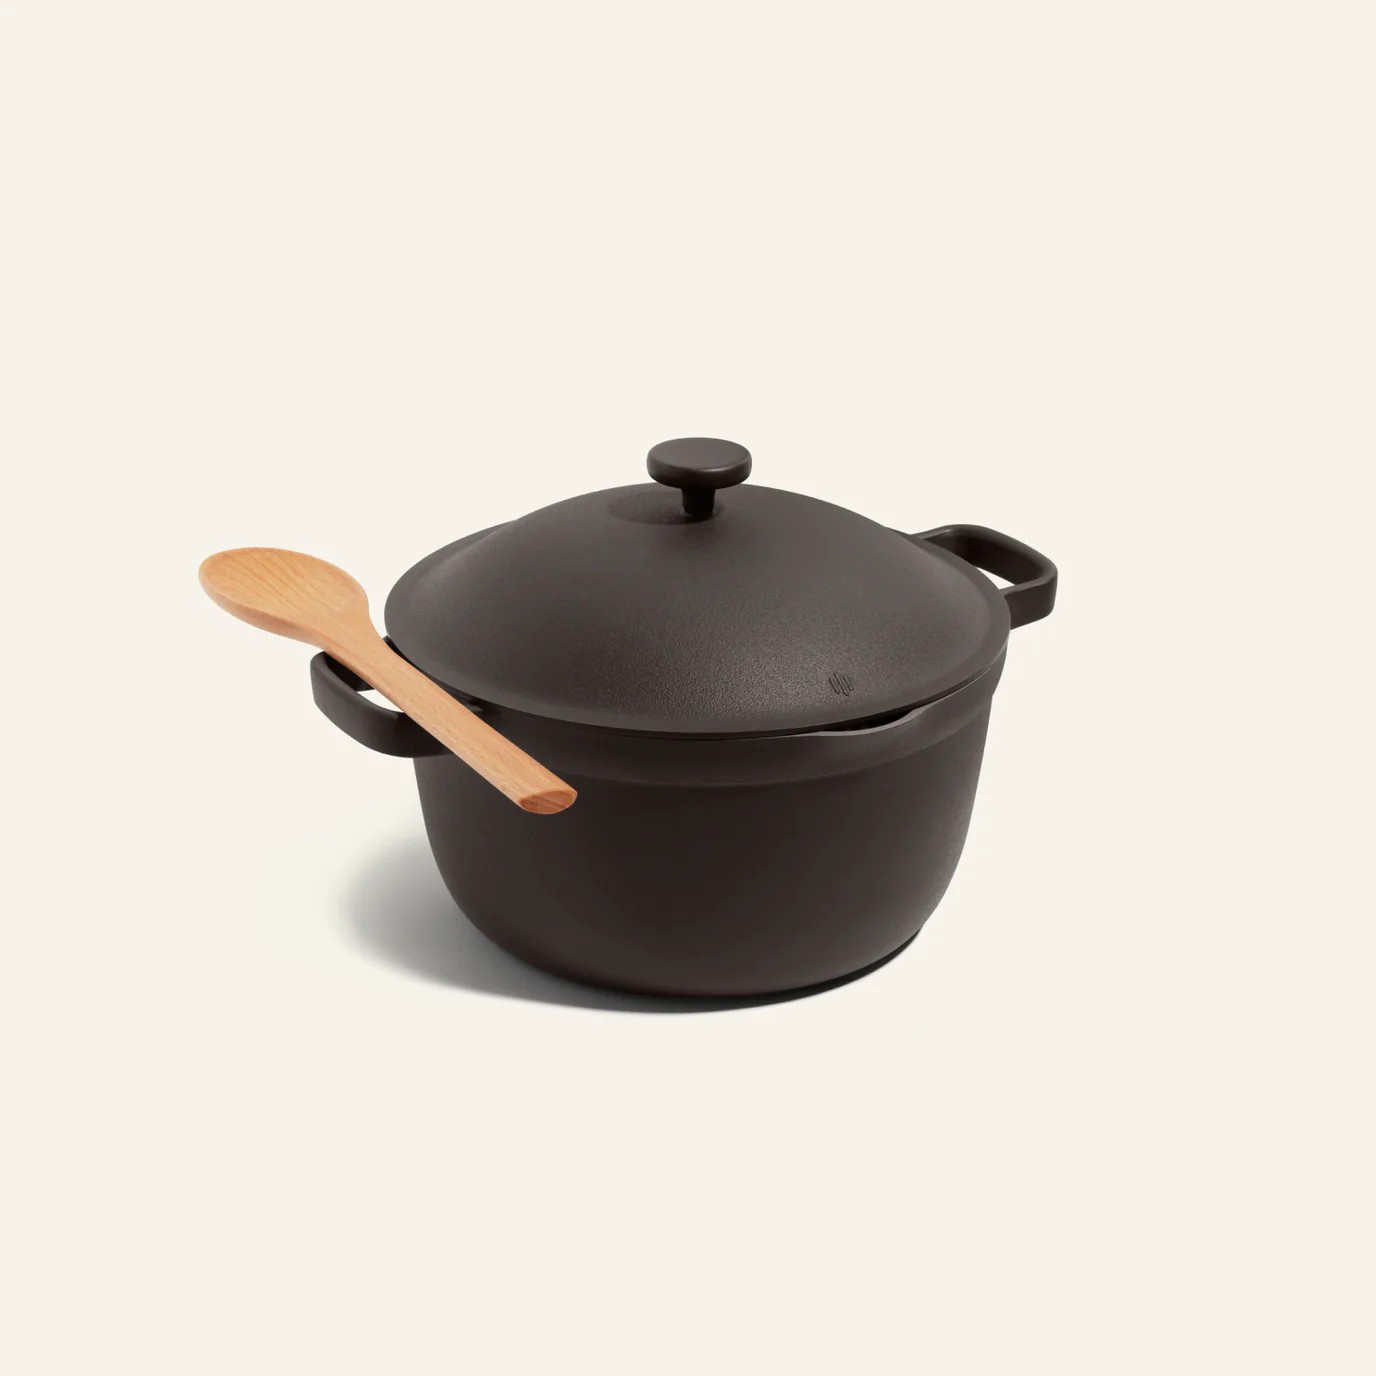 The Always Pan is on sale for 30% off this Black Friday 2021